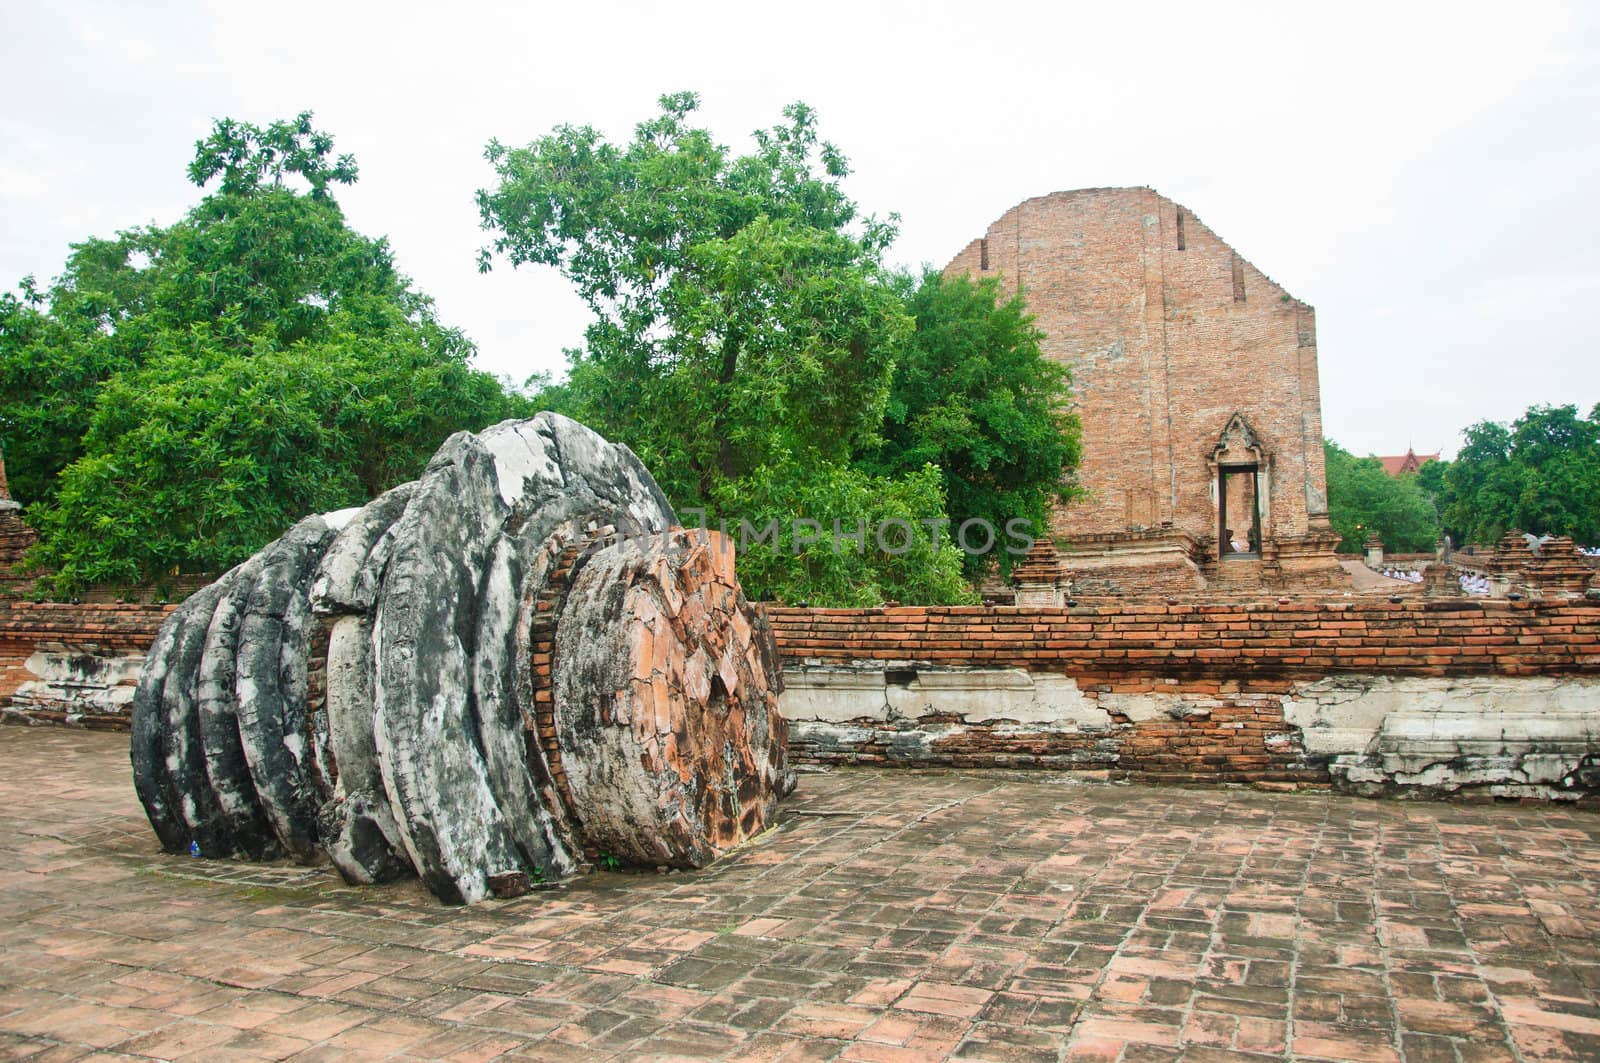 The ruins of the old pagoda at Ma Hae Yong temple, Thailand